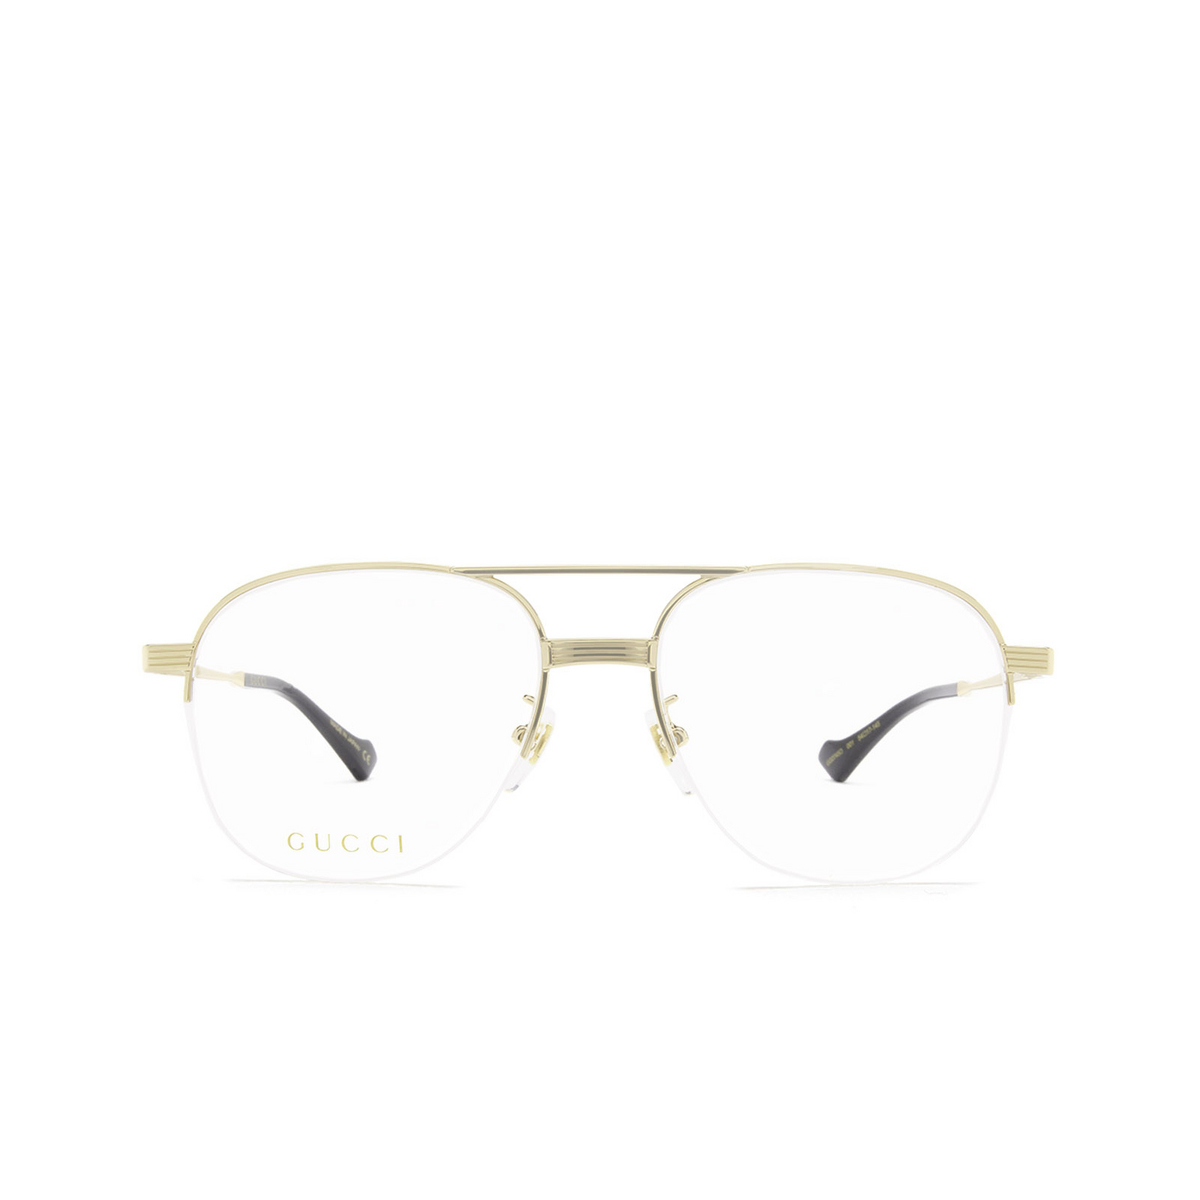 Gucci® Aviator Eyeglasses: GG0745O color 001 Gold - front view